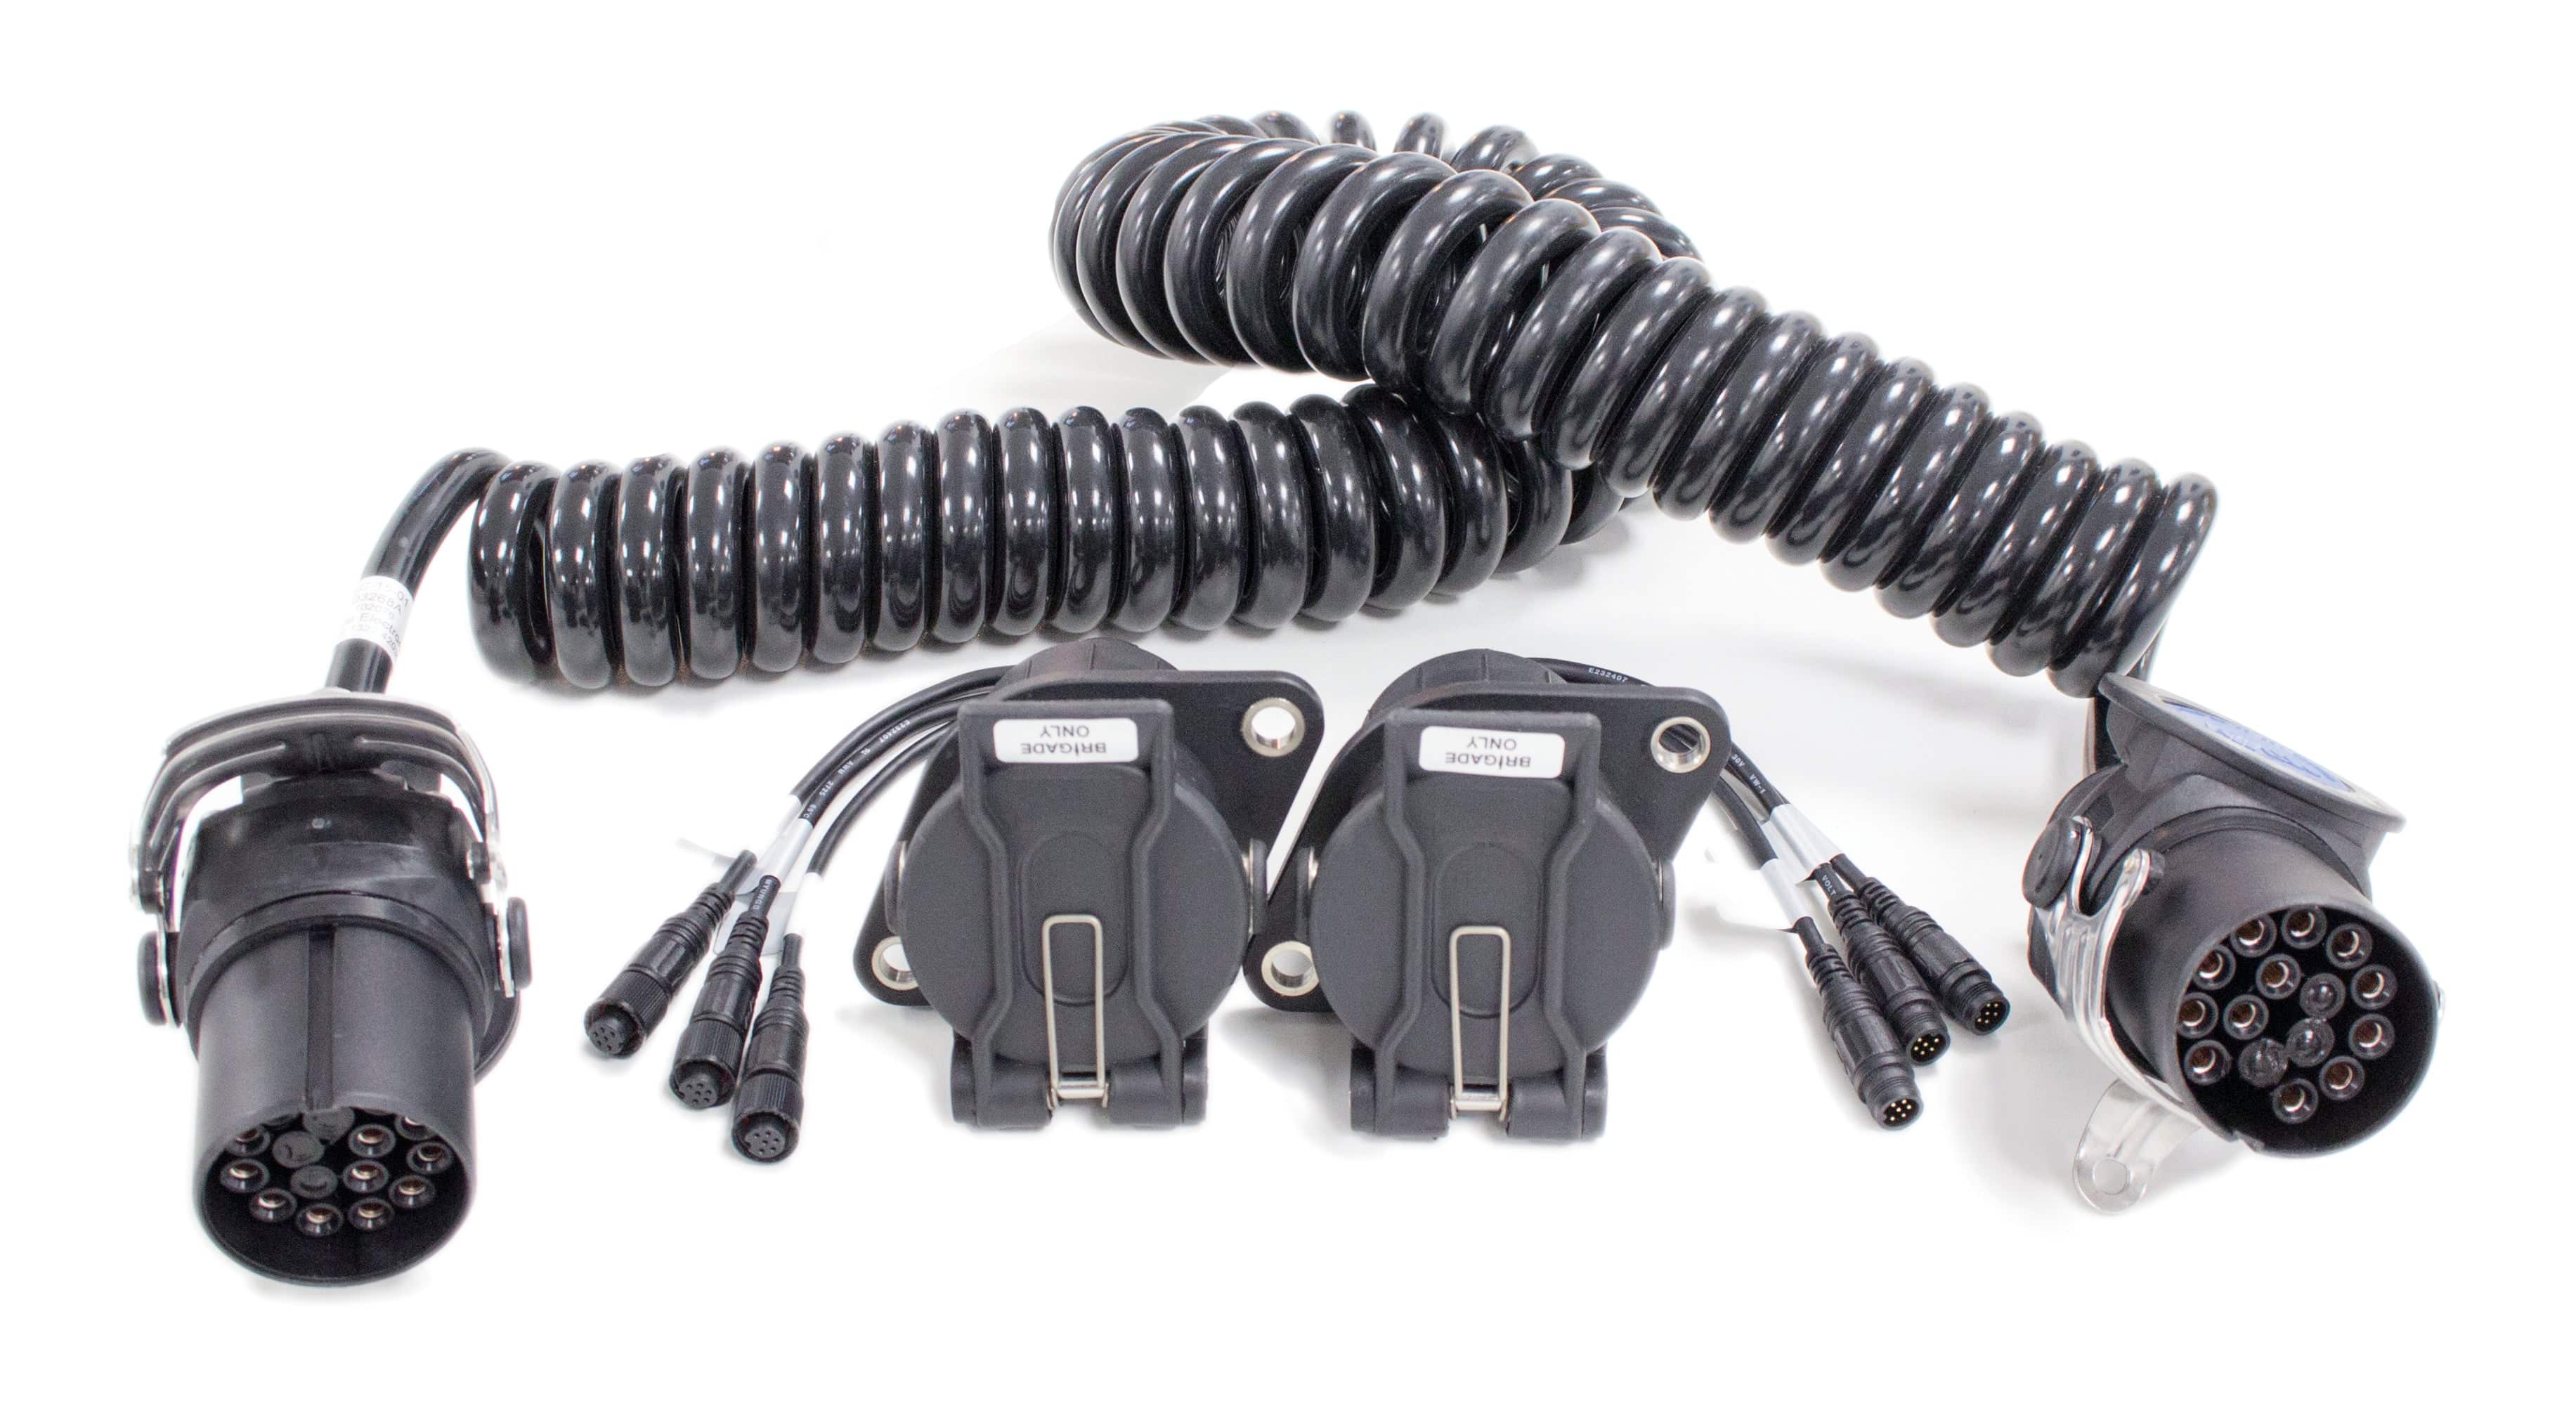 Truck/Trailer sensor only cable kit (required) for Ultrasonic systems